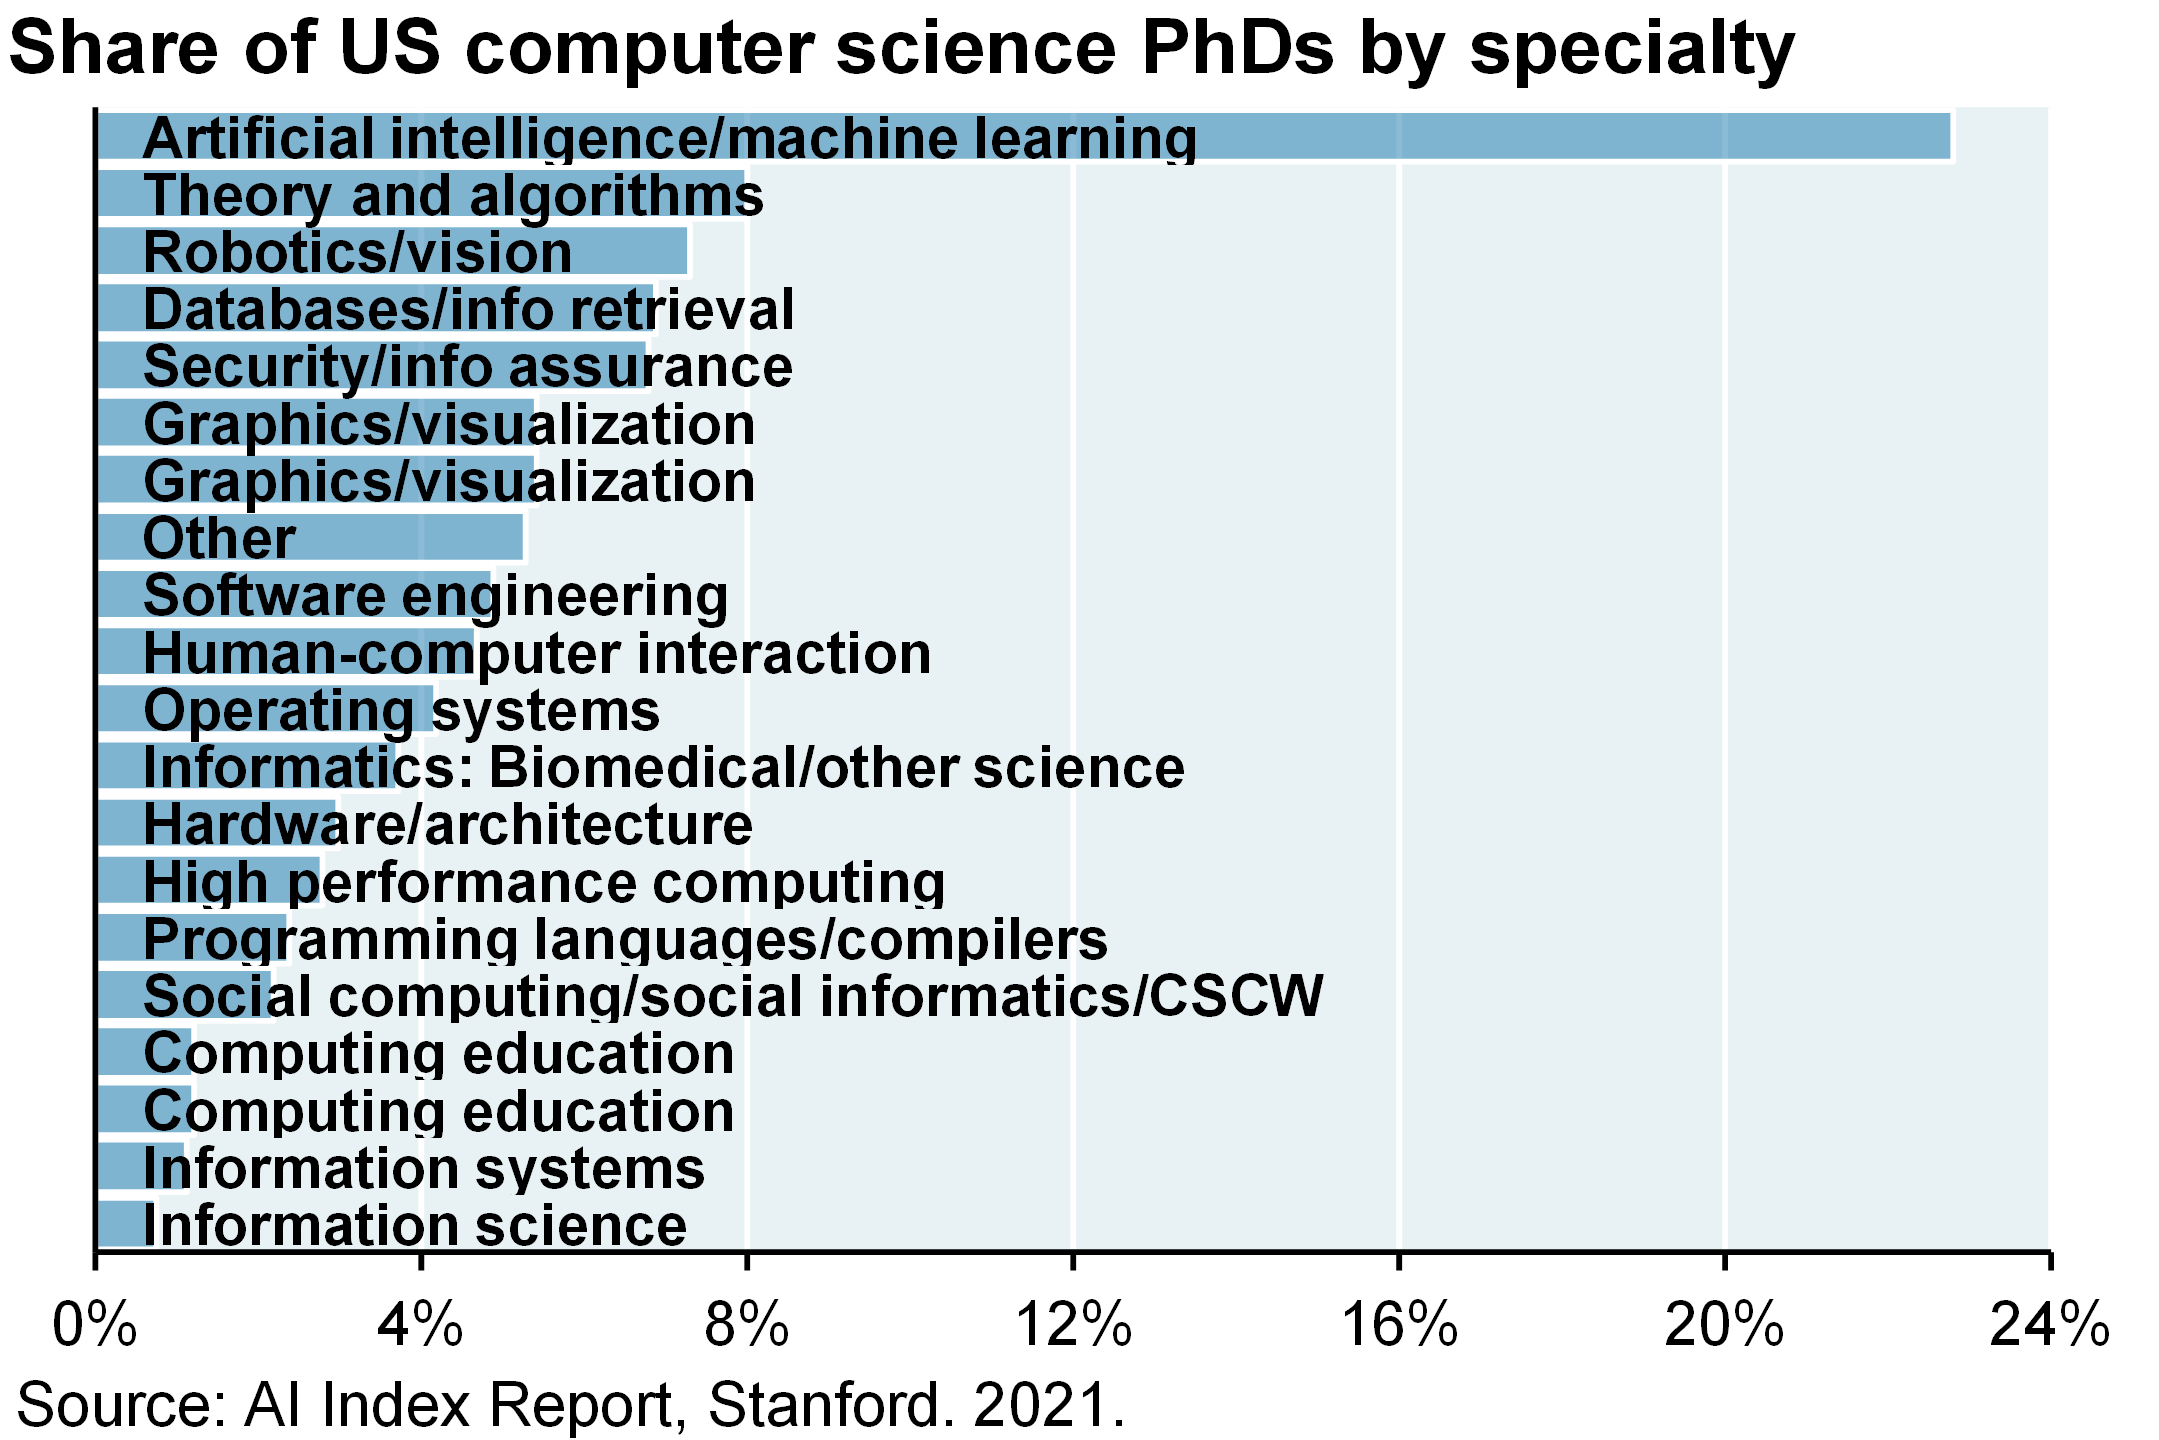 Bar chart shows the share of US computer science PhDs by specialty. The chart shows that artificial intelligence and machine learning maintains the highest share at ~23%.